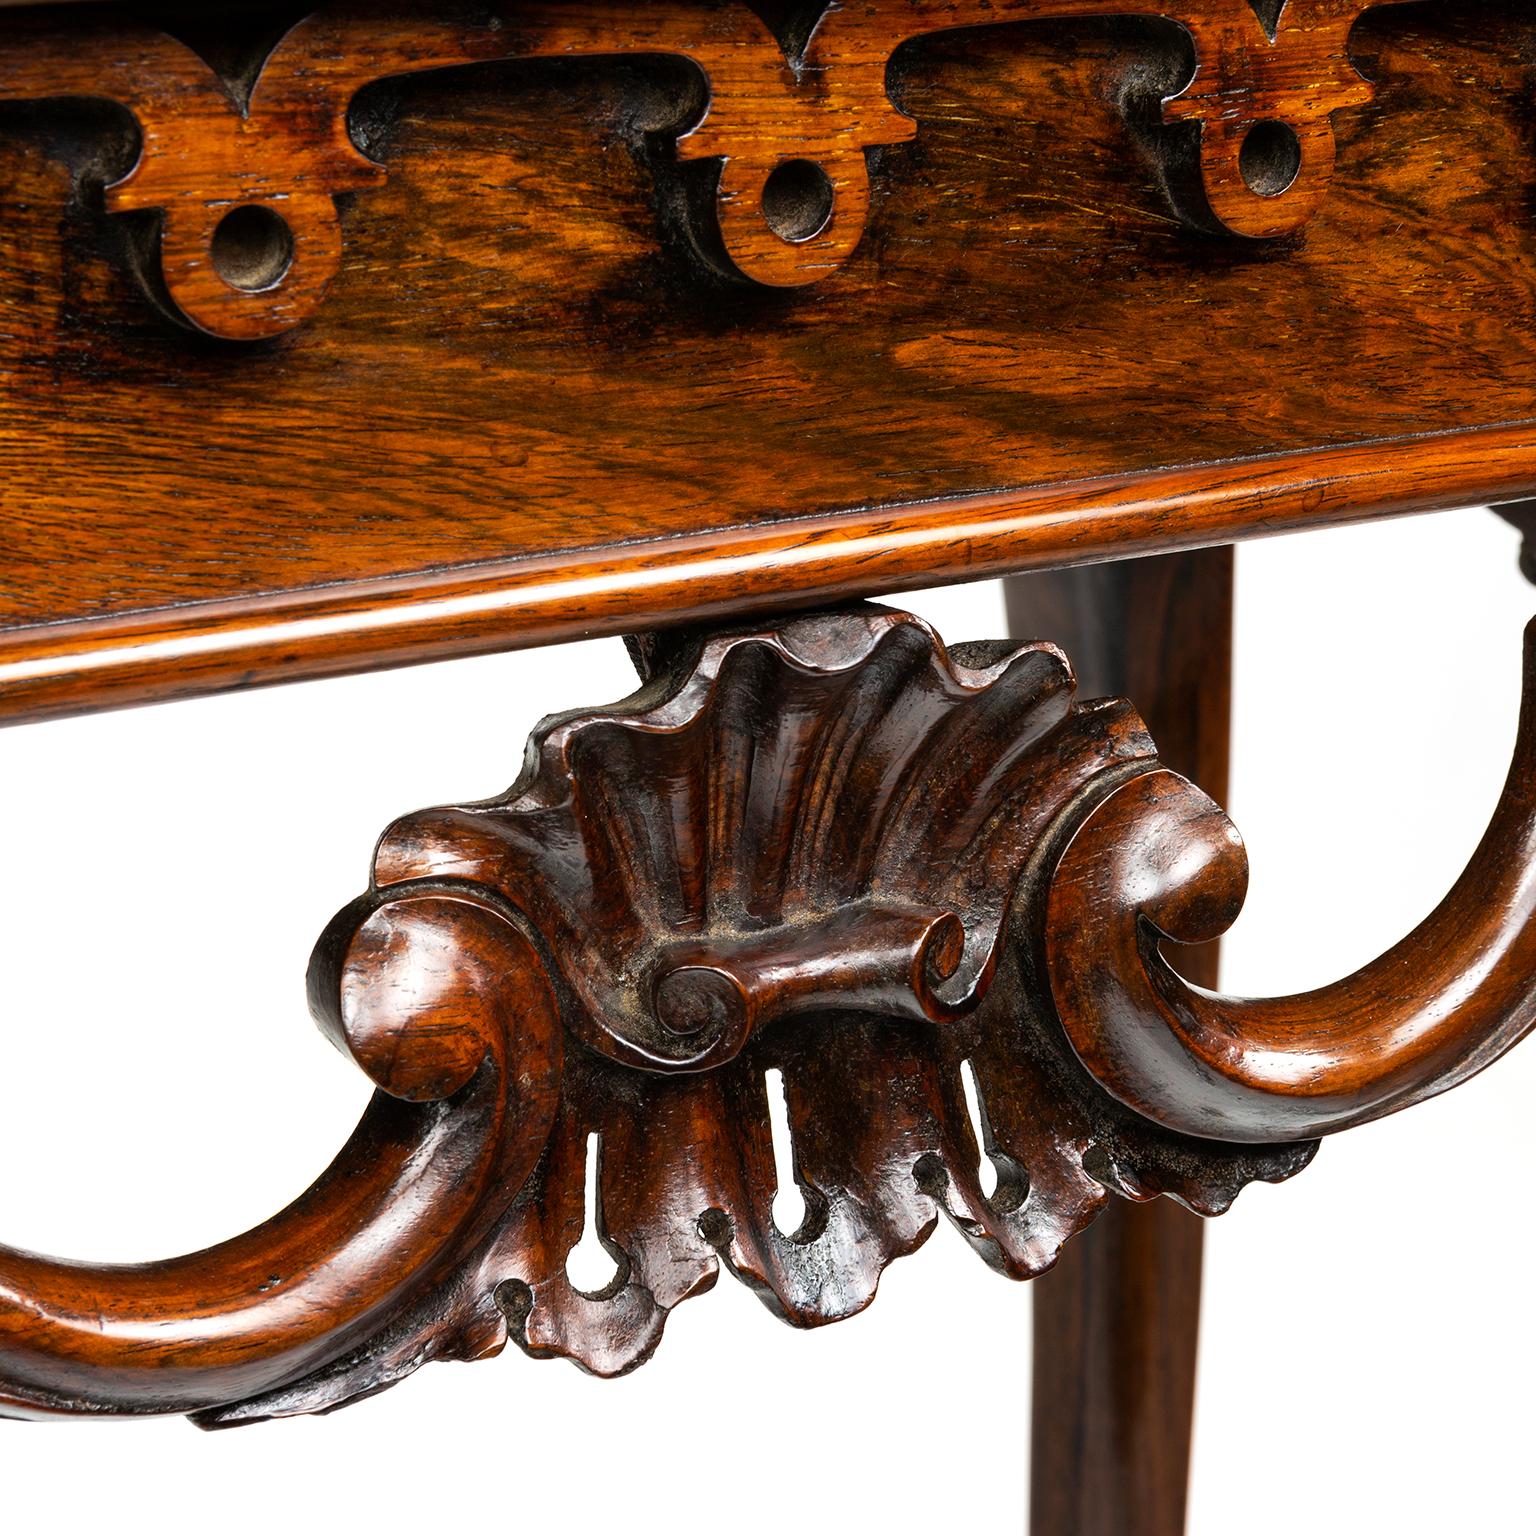 A Victorian centre table in the French taste made with fine figured rosewood. probably made or at least retailed by Druce and Co.

As the owner of a fine London home during the early reign of Queen Victoria, a person of note would certainly have